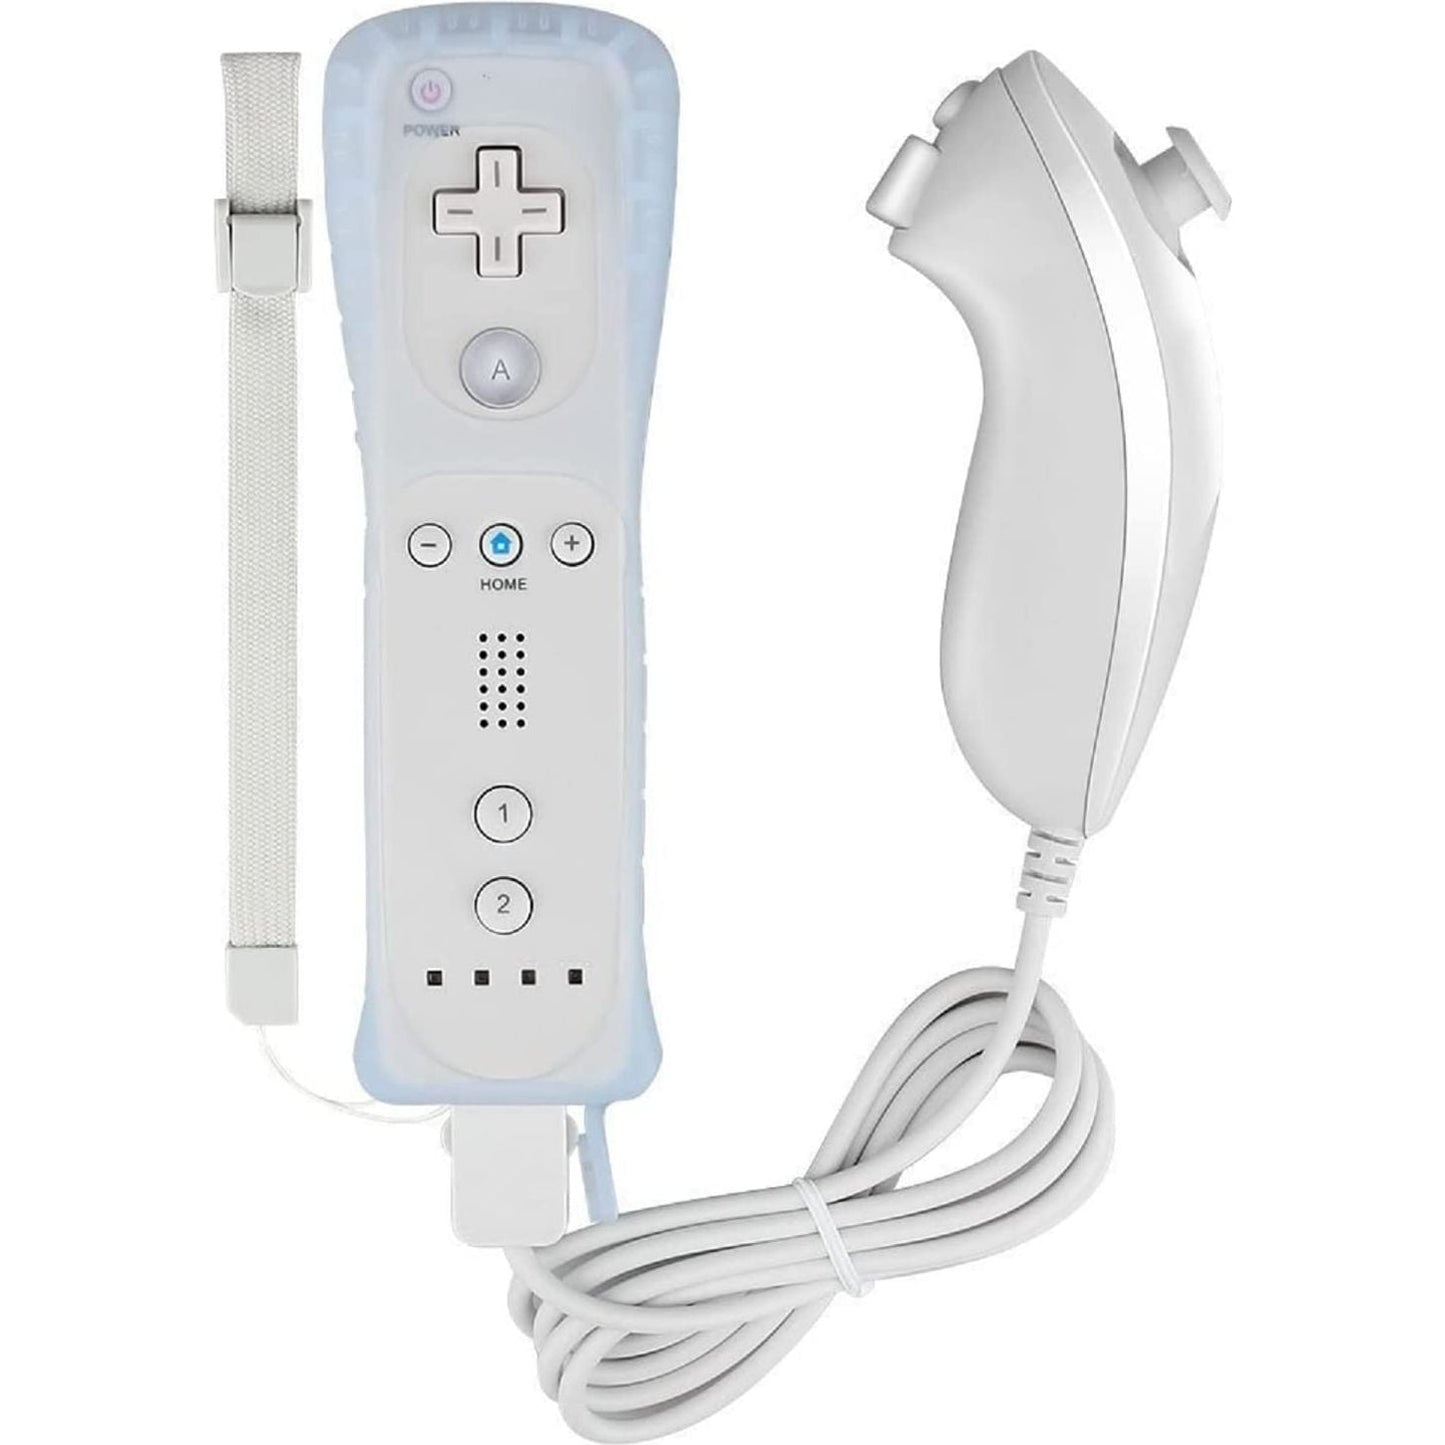 Nintendo Wii Console Bundle - White - Mario Kart - Wii Sports - 2 Motion Plus Controllers from 2P Gaming